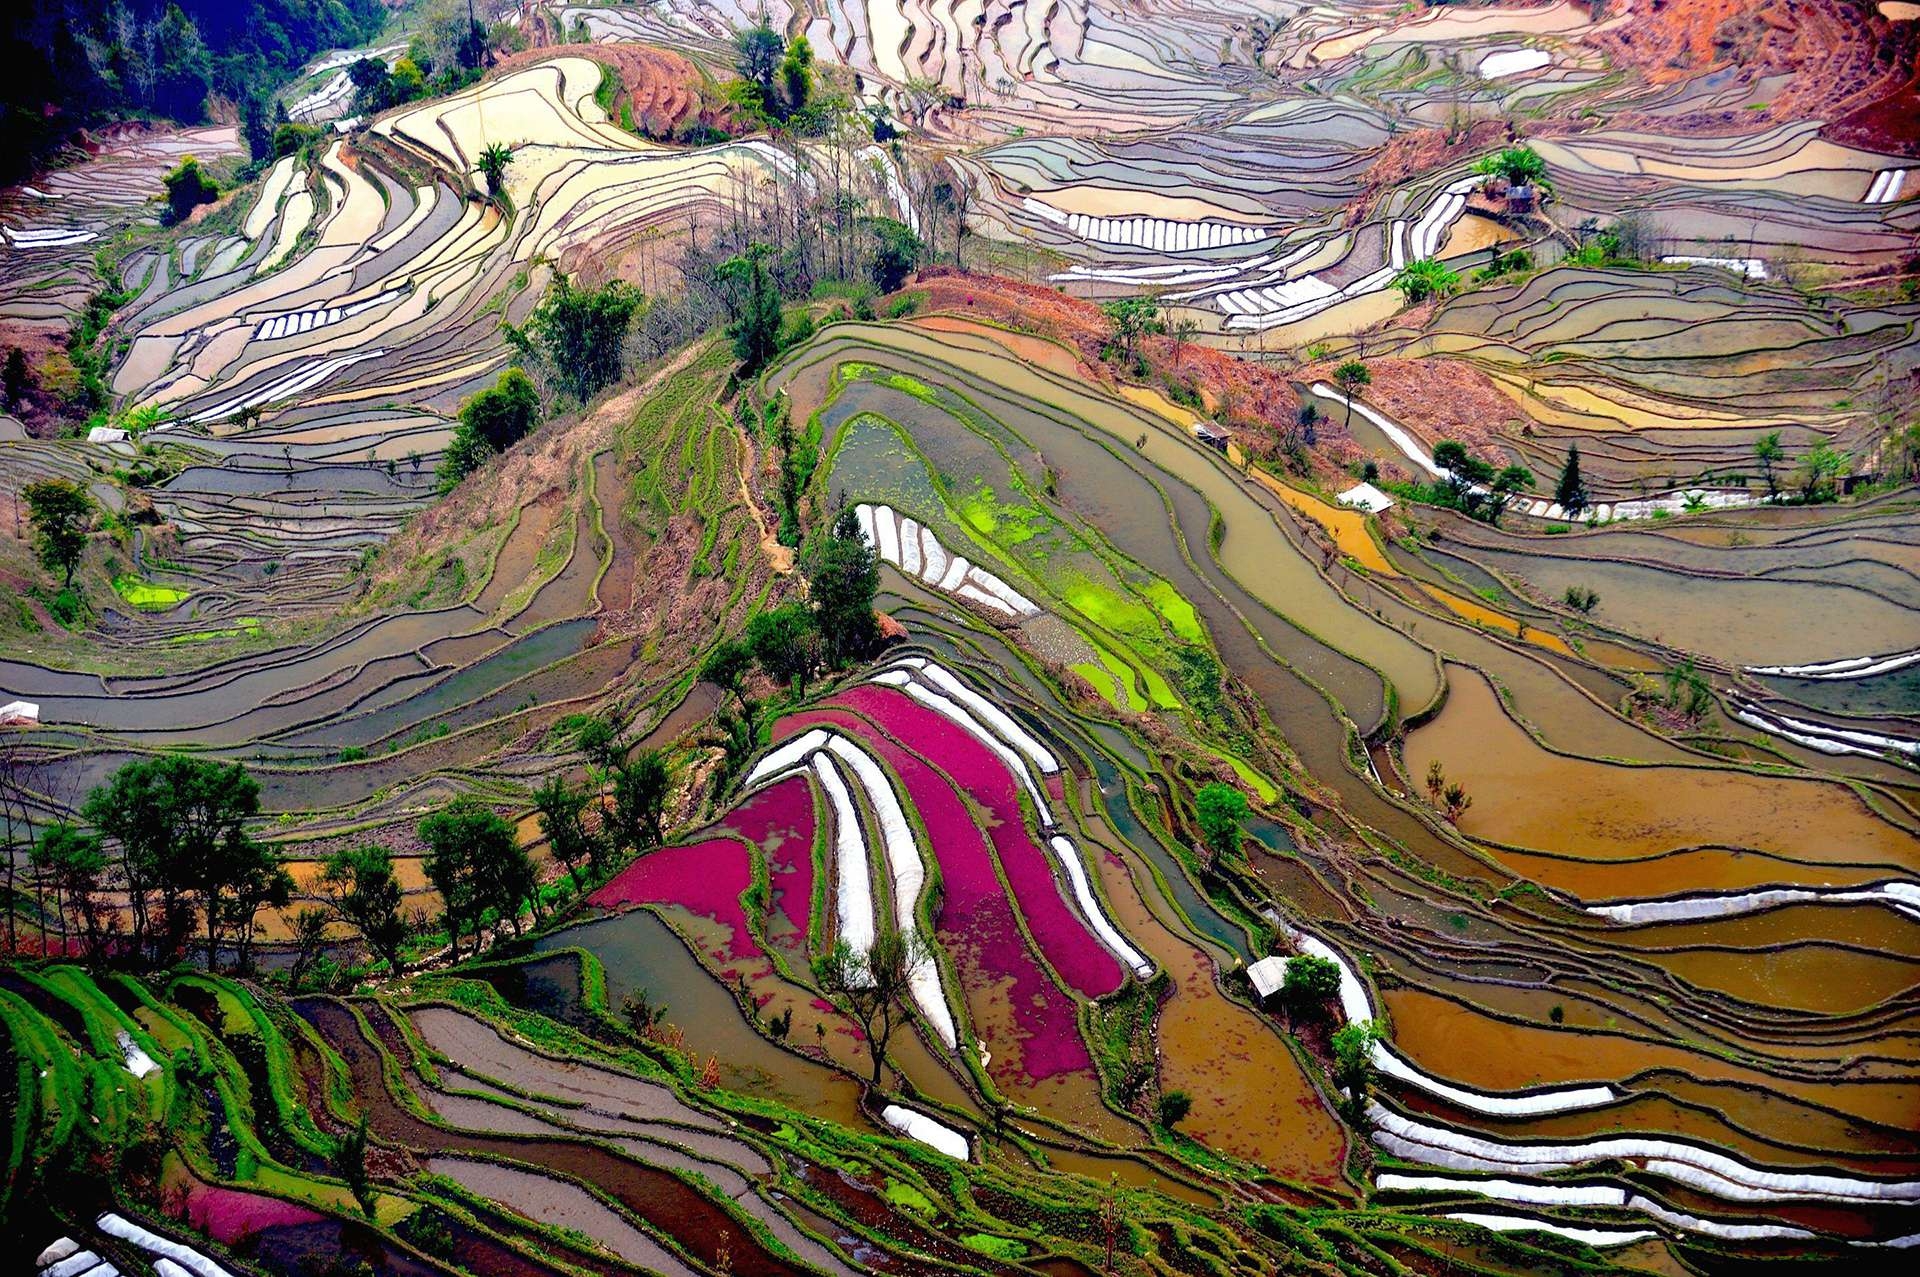 Photograph by Thierry Bornier